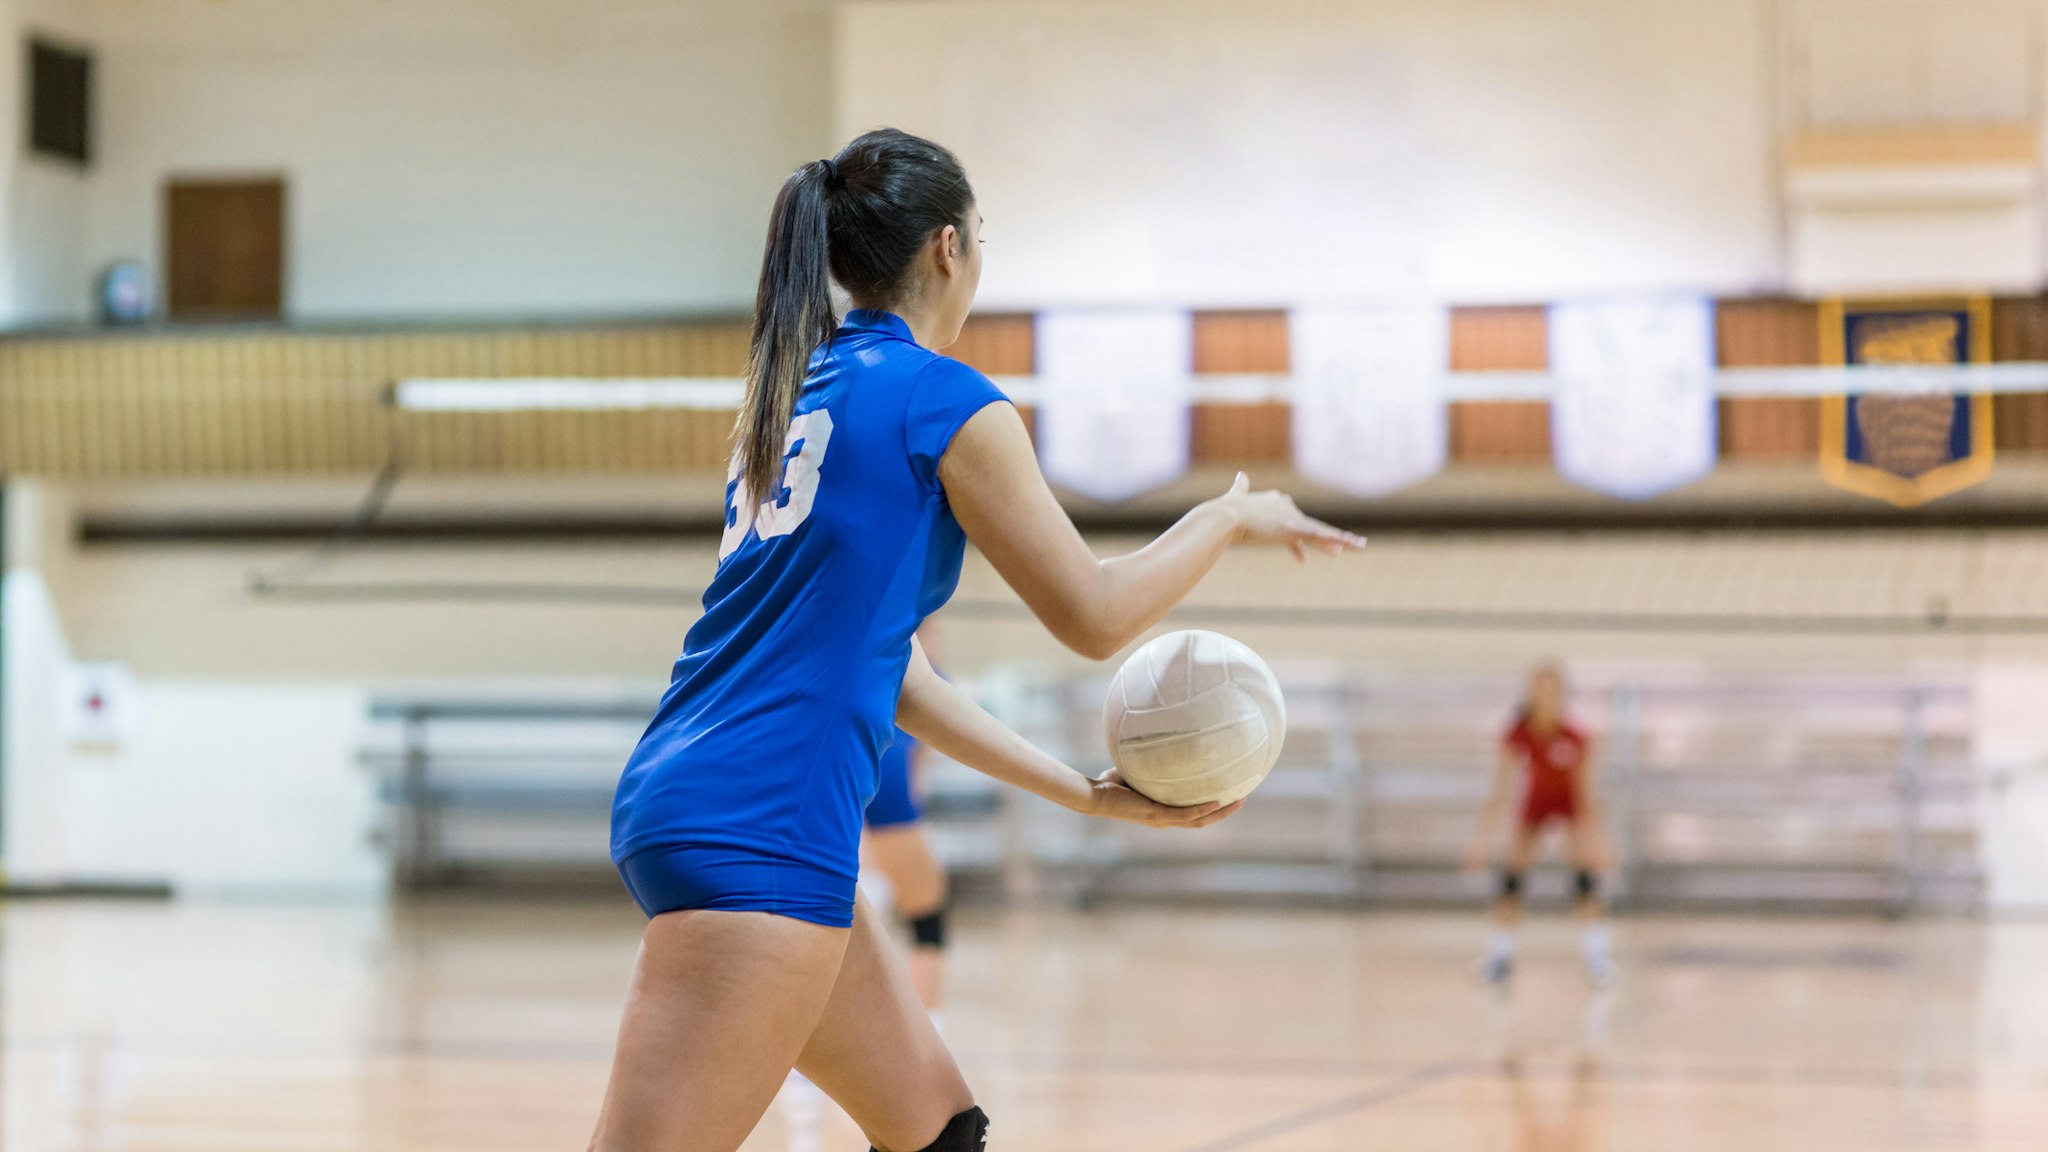 A teenage volleyball player gets ready to serve the ball in a high school gym. The shot is from behind her. The opposing team is getting ready to return the serve. There are banners hanging in the gym overhead.